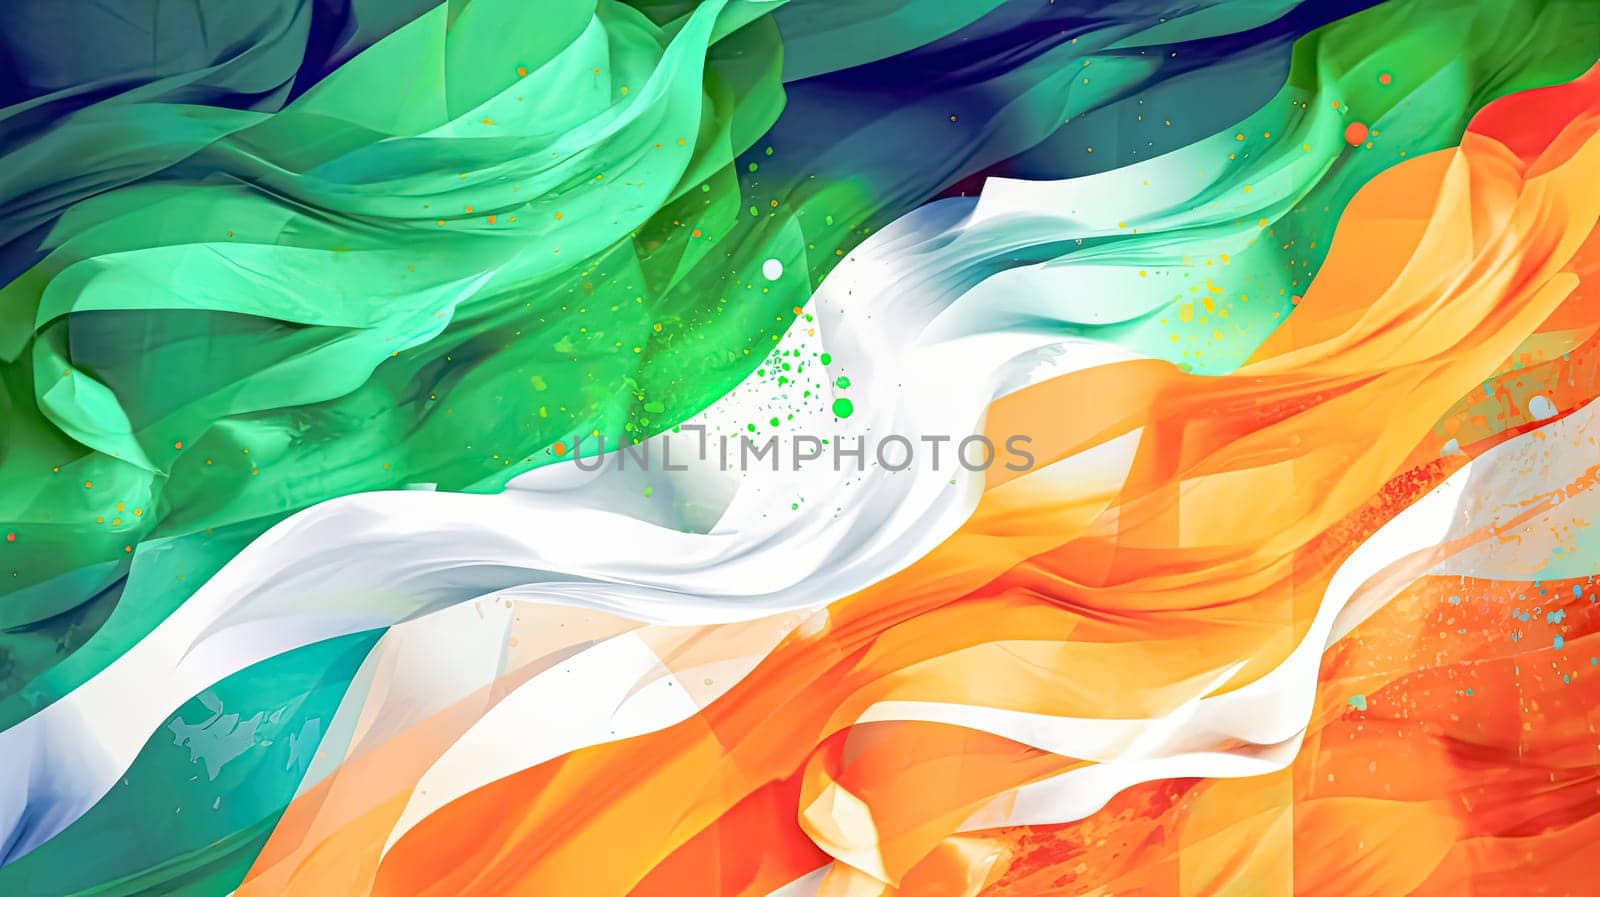 Irish Elegance, Watercolor abstract of the Ireland flag, a vibrant and artistic representation for St. Patrick's Day, capturing the spirit